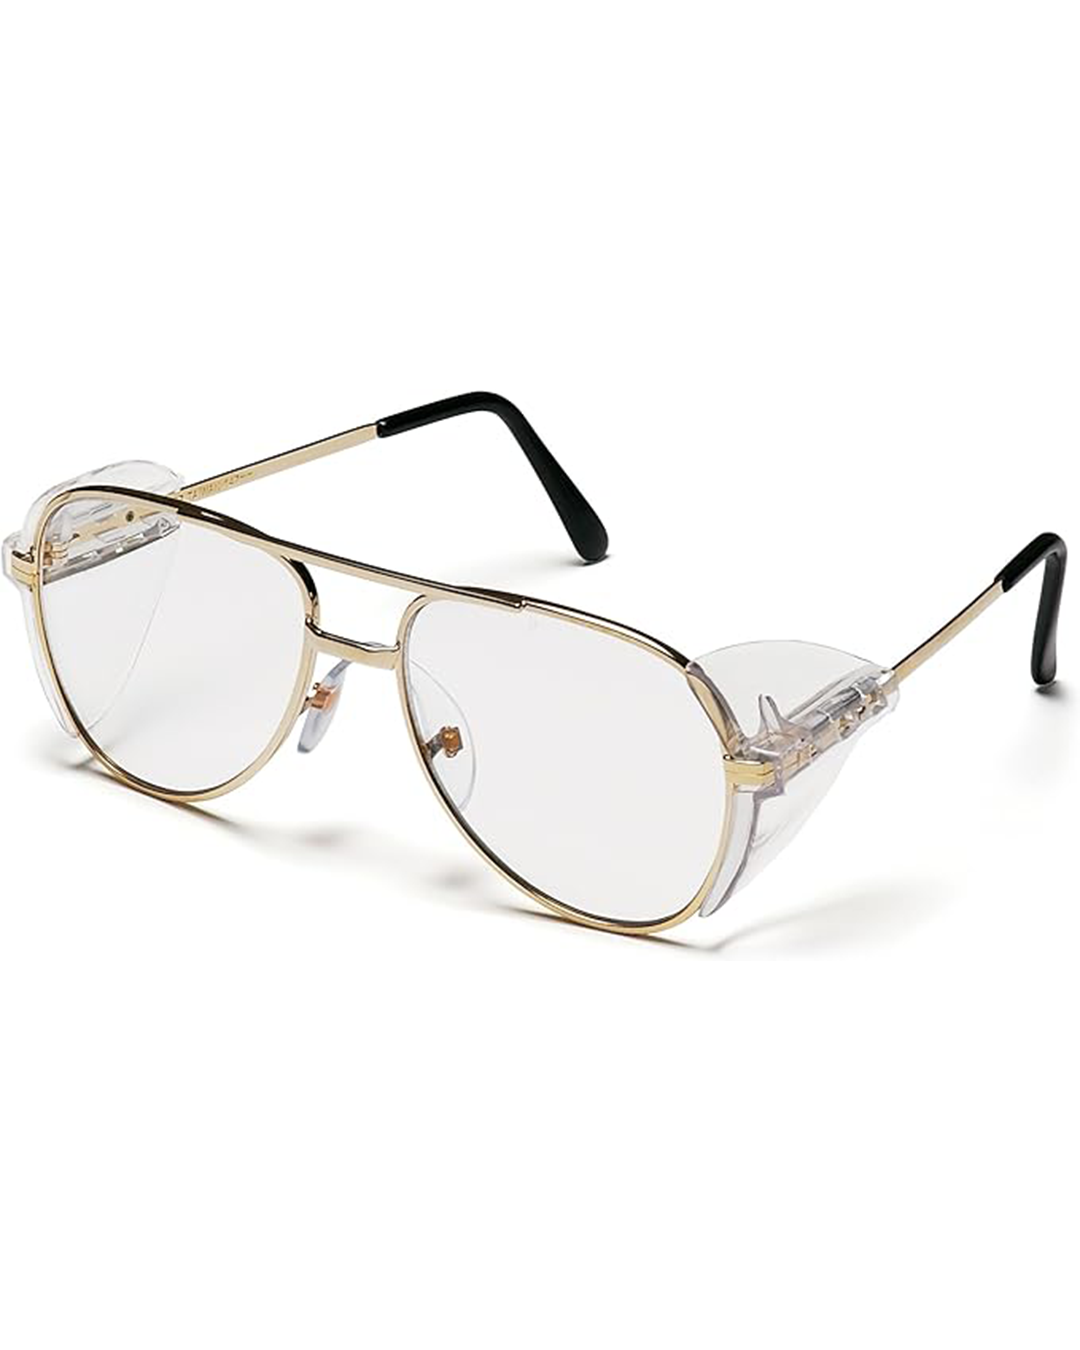 PYRAMEX Pathfinder Aviator Safety Glasses with Gold Frame and Clear Le ...